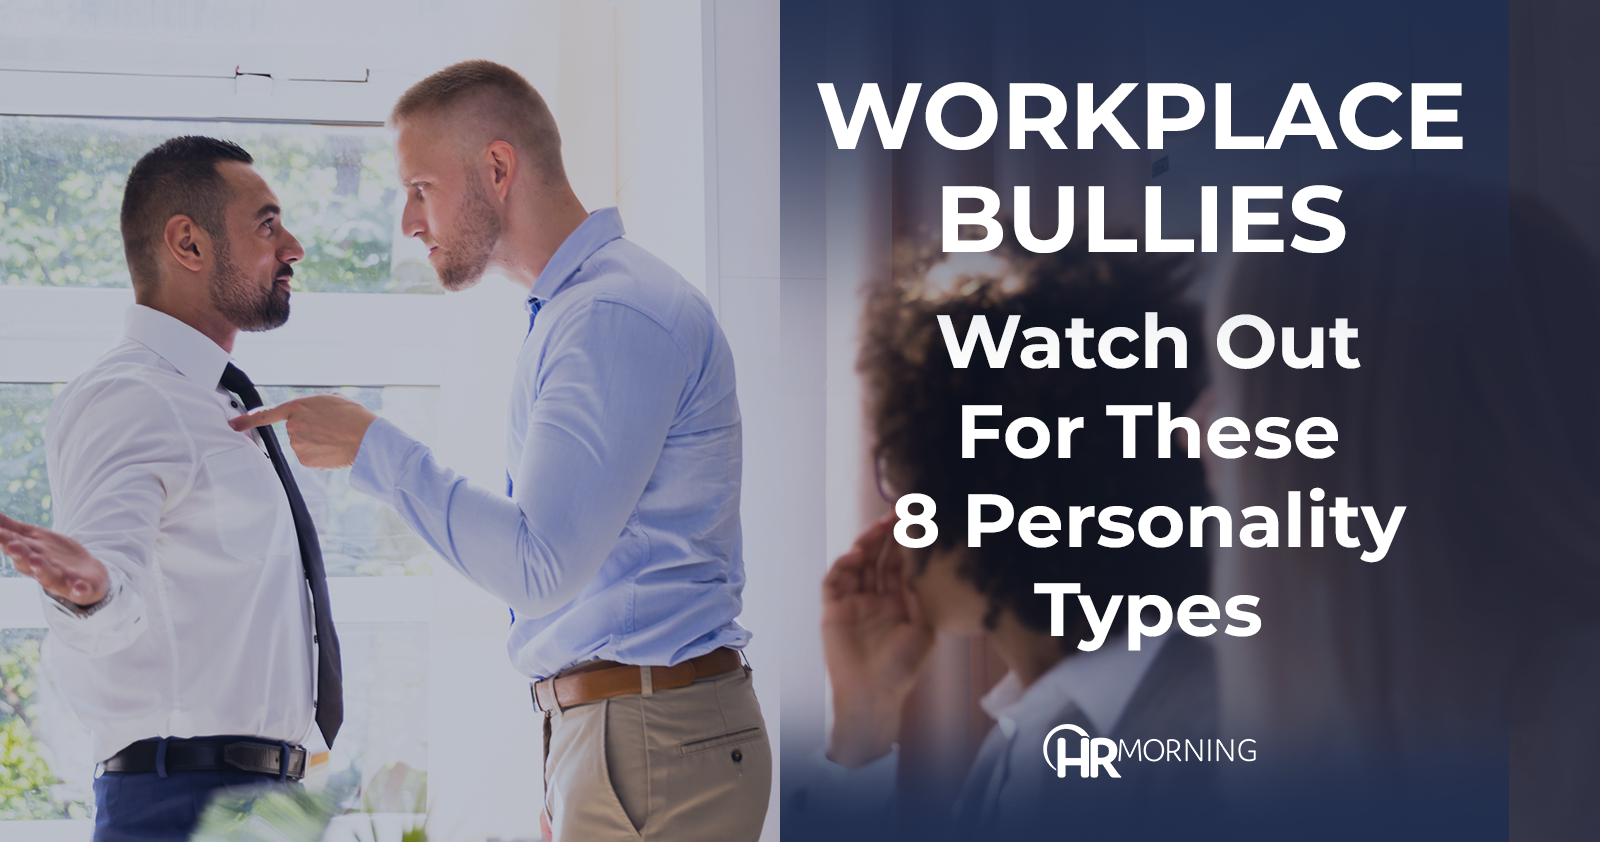 Workplace Bullies: Watch Out for these 8 Personality Types